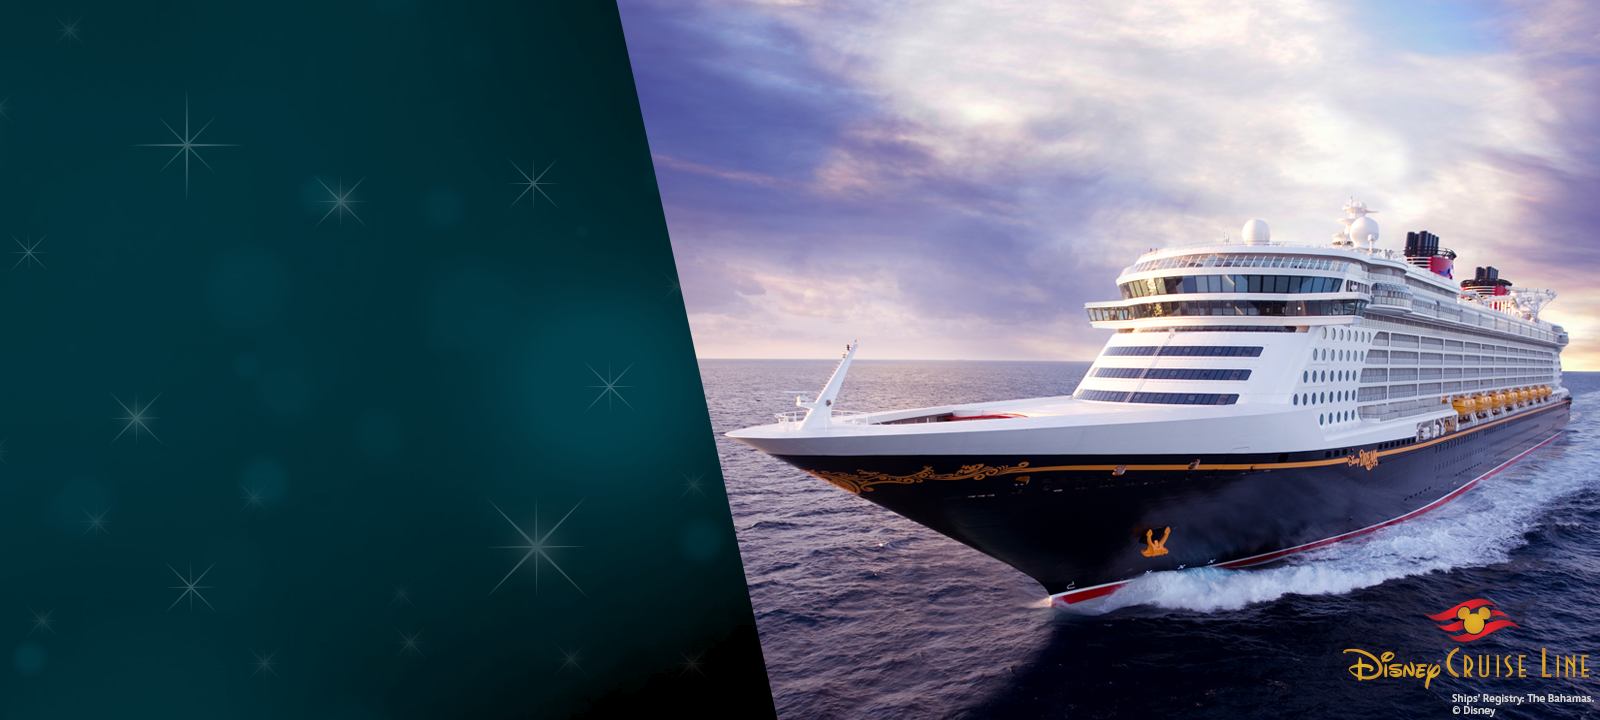 Enter to Win a Disney Cruise and Other Fun Disney Prizes from Disney Movie Rewards!